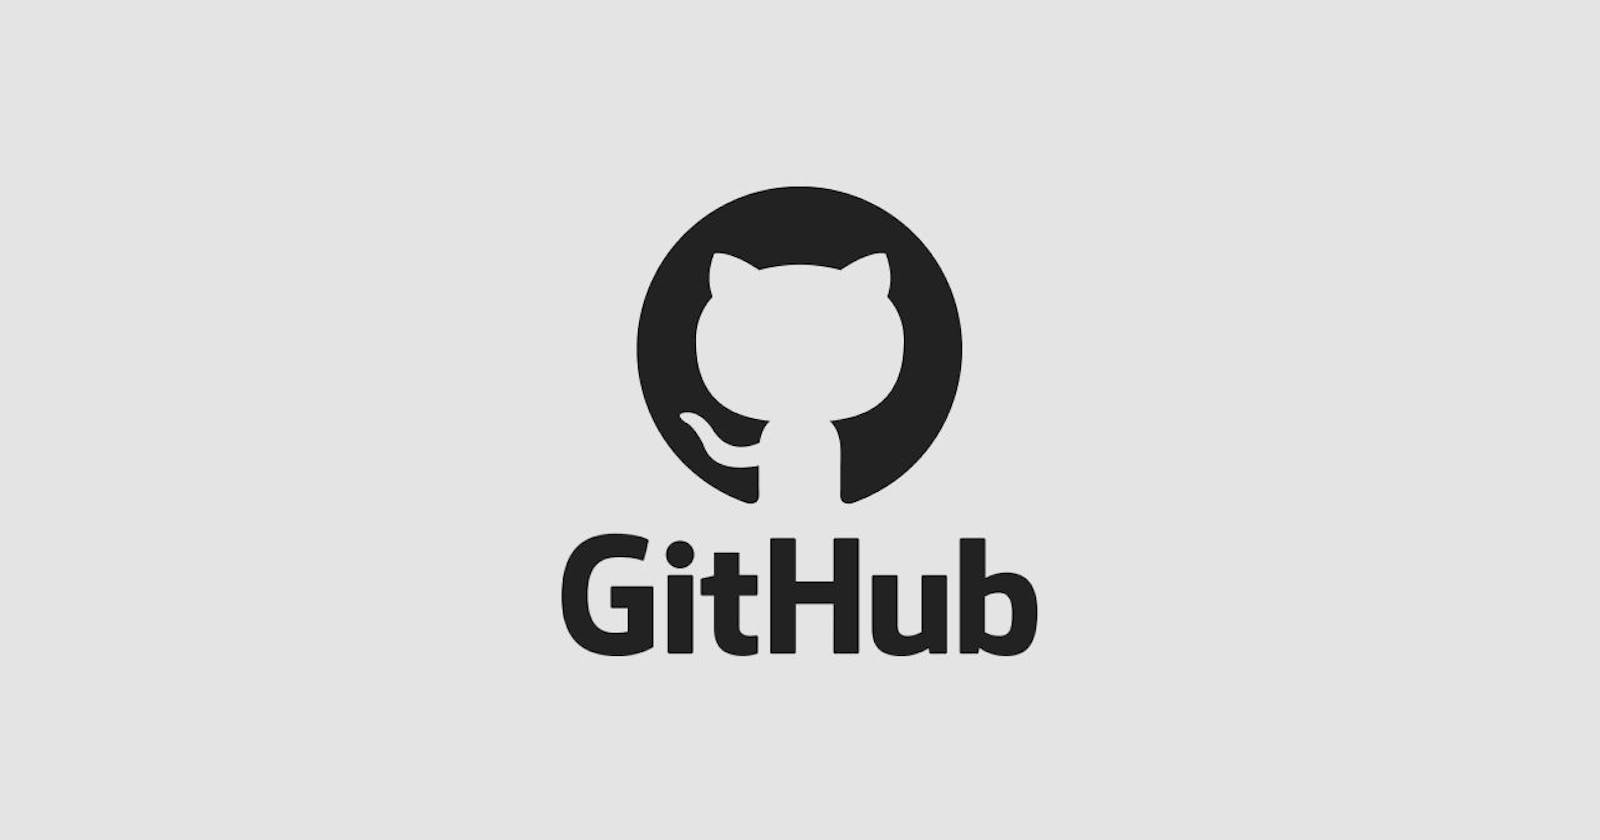 How to delete all commit history in GitHub?